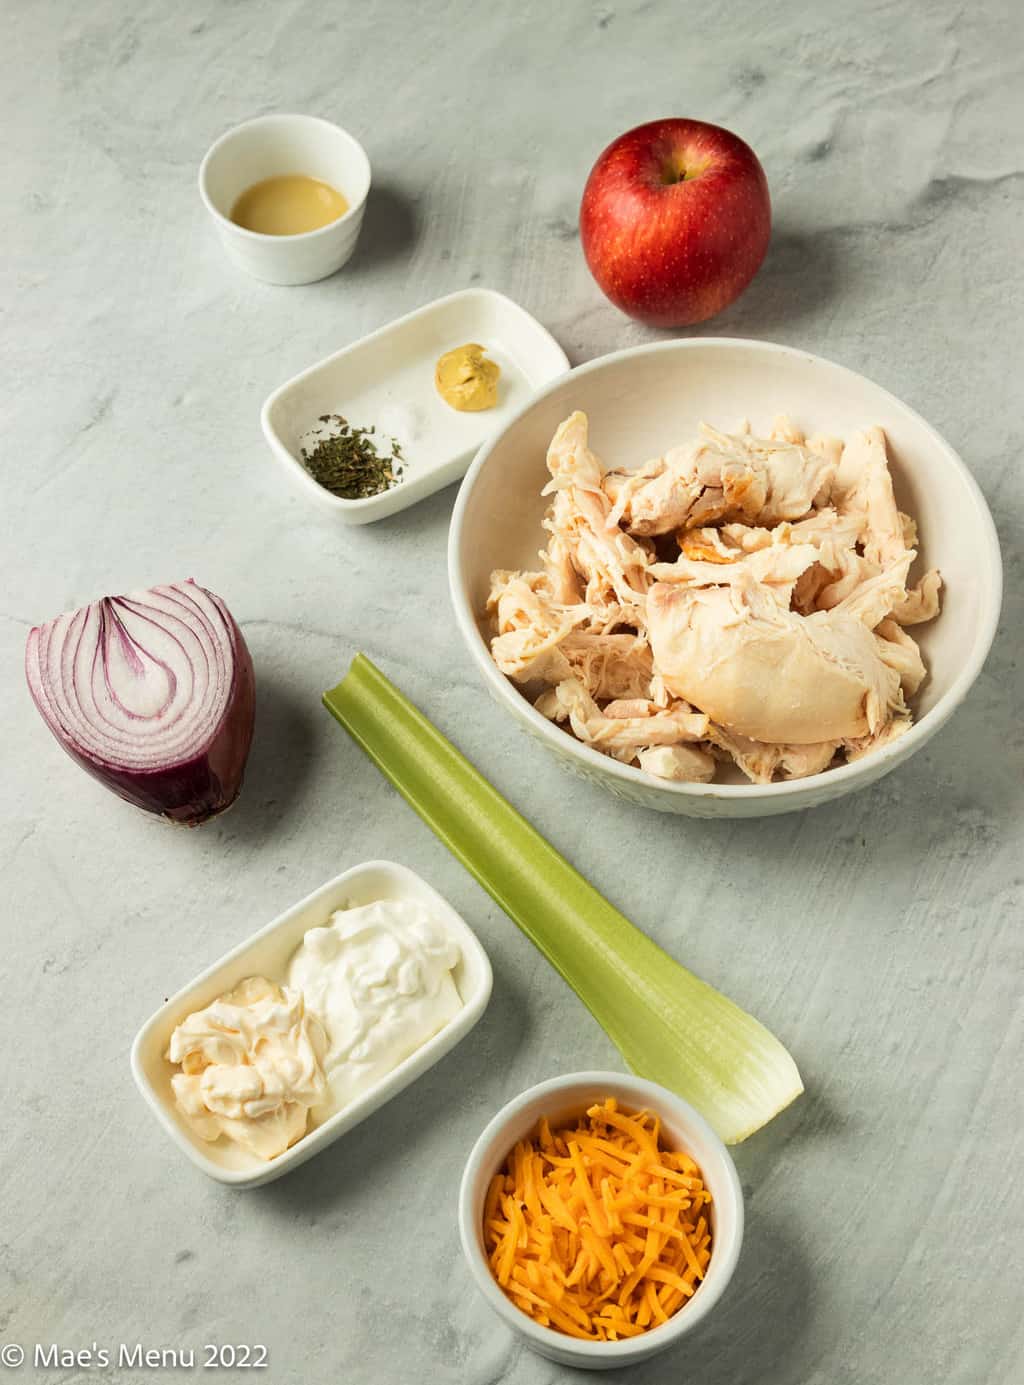 All the ingredients for rotisserie chicken salad sandiwches: chicken, apple, seaonings, sour cream mayonnaise, cheese, celery, red onion, and apple cider vinegar.